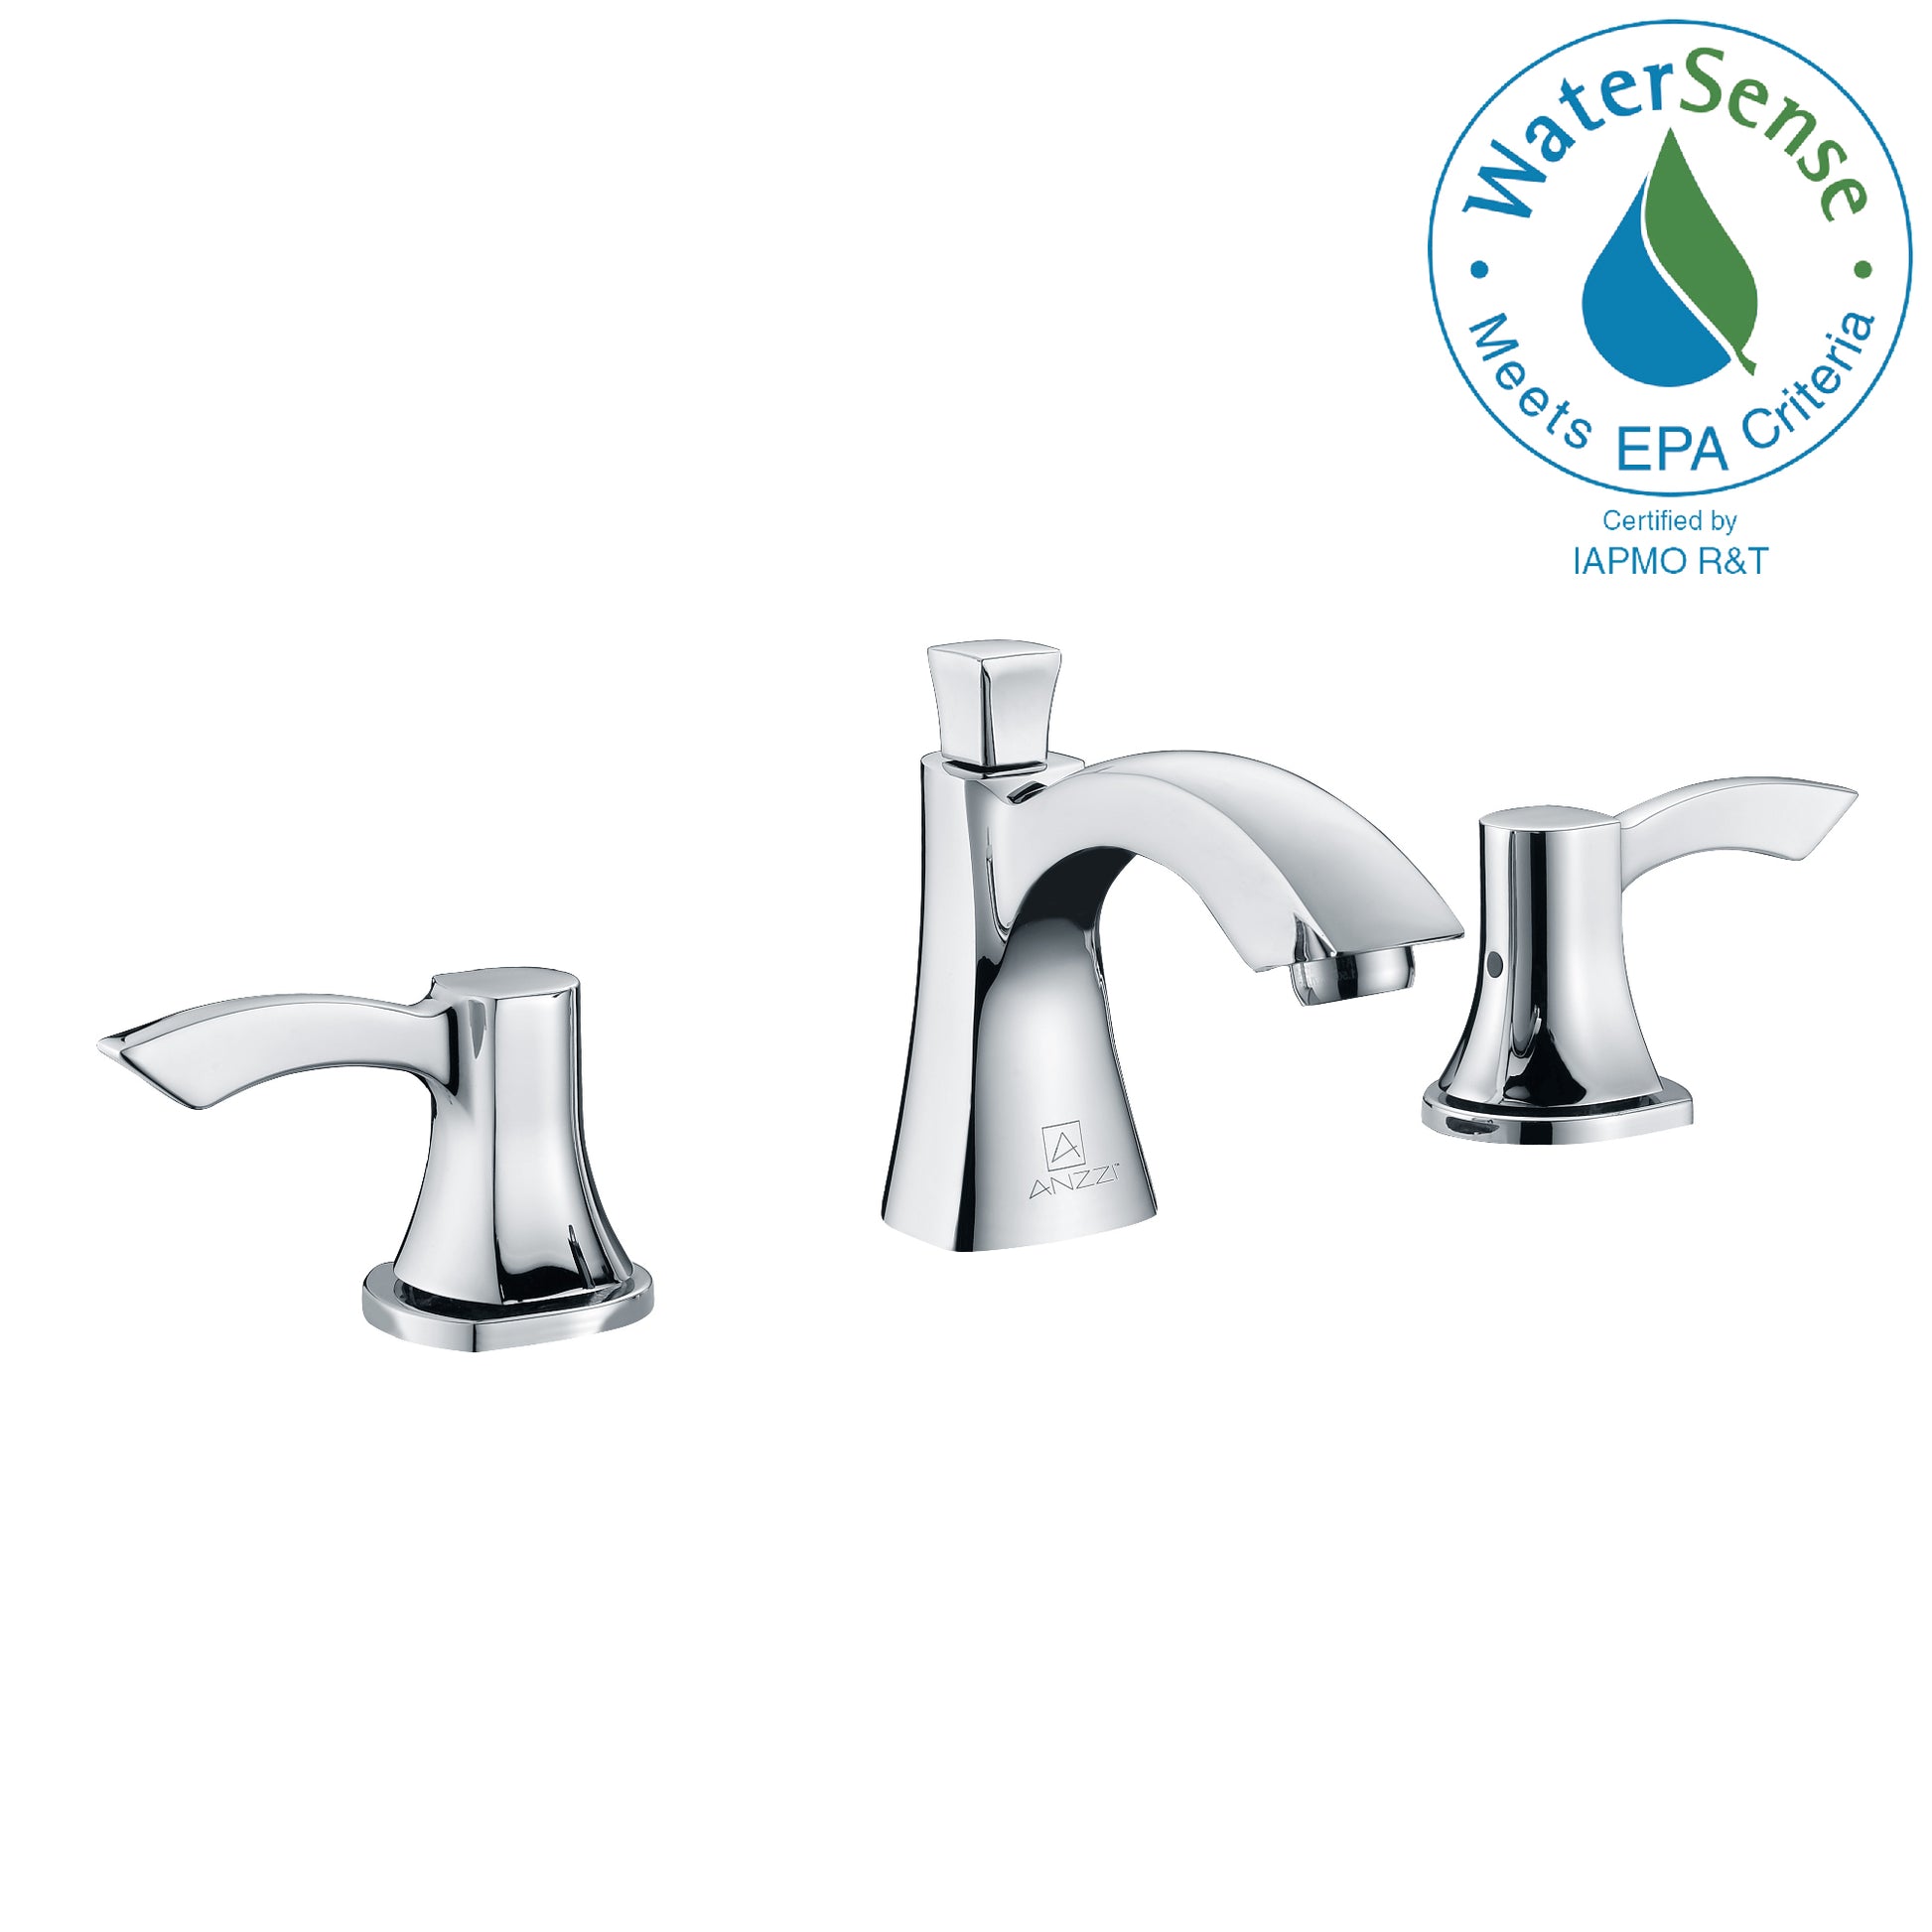 L-AZ015 - Sonata Series 8 in. Widespread 2-Handle Mid-Arc Bathroom Faucet in Polished Chrome